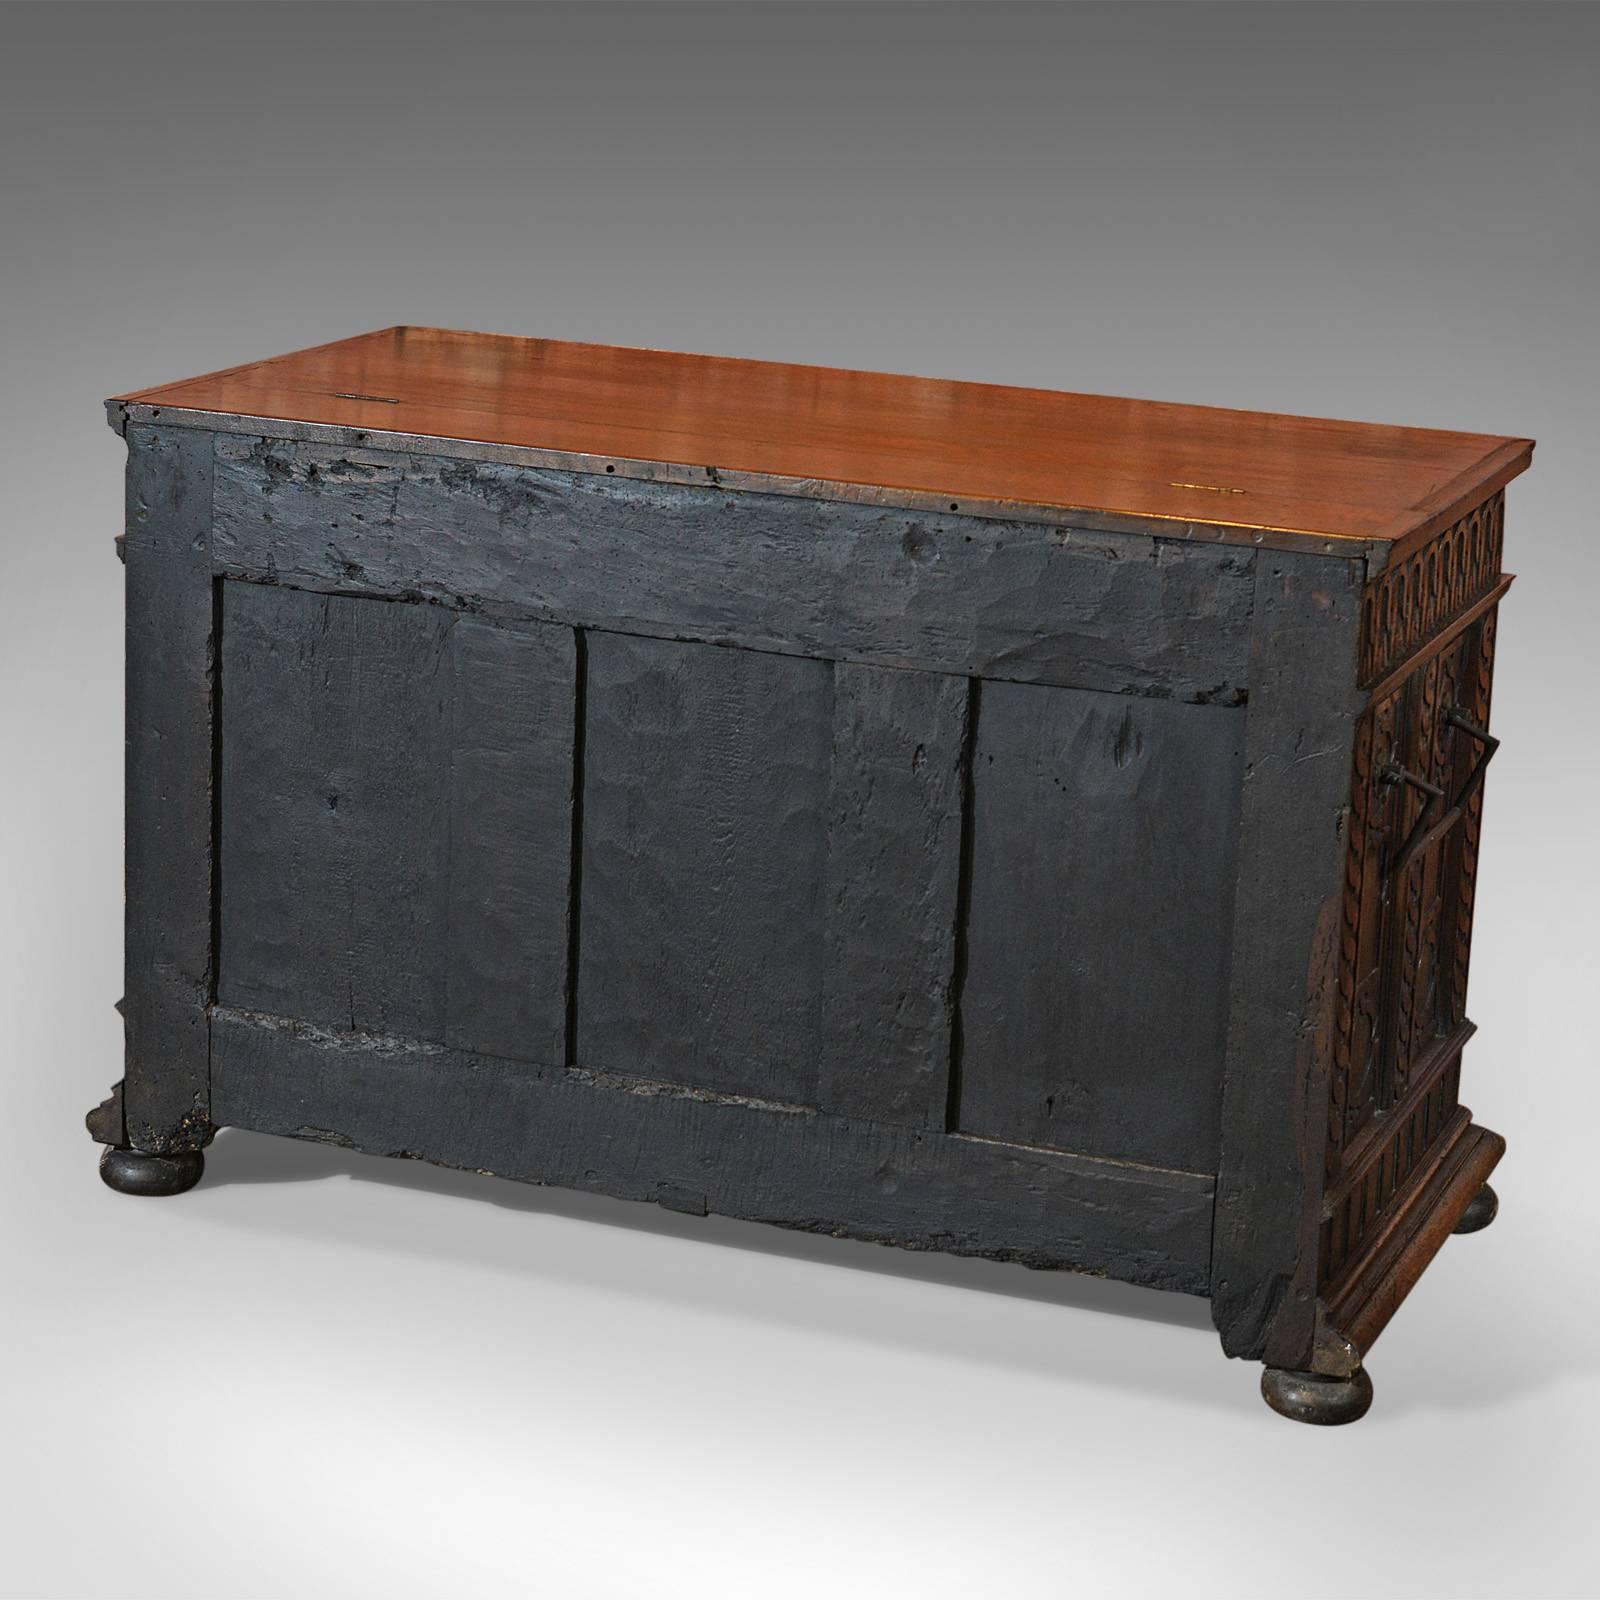 Hand-Carved Antique Coffer, French Walnut, circa 1800